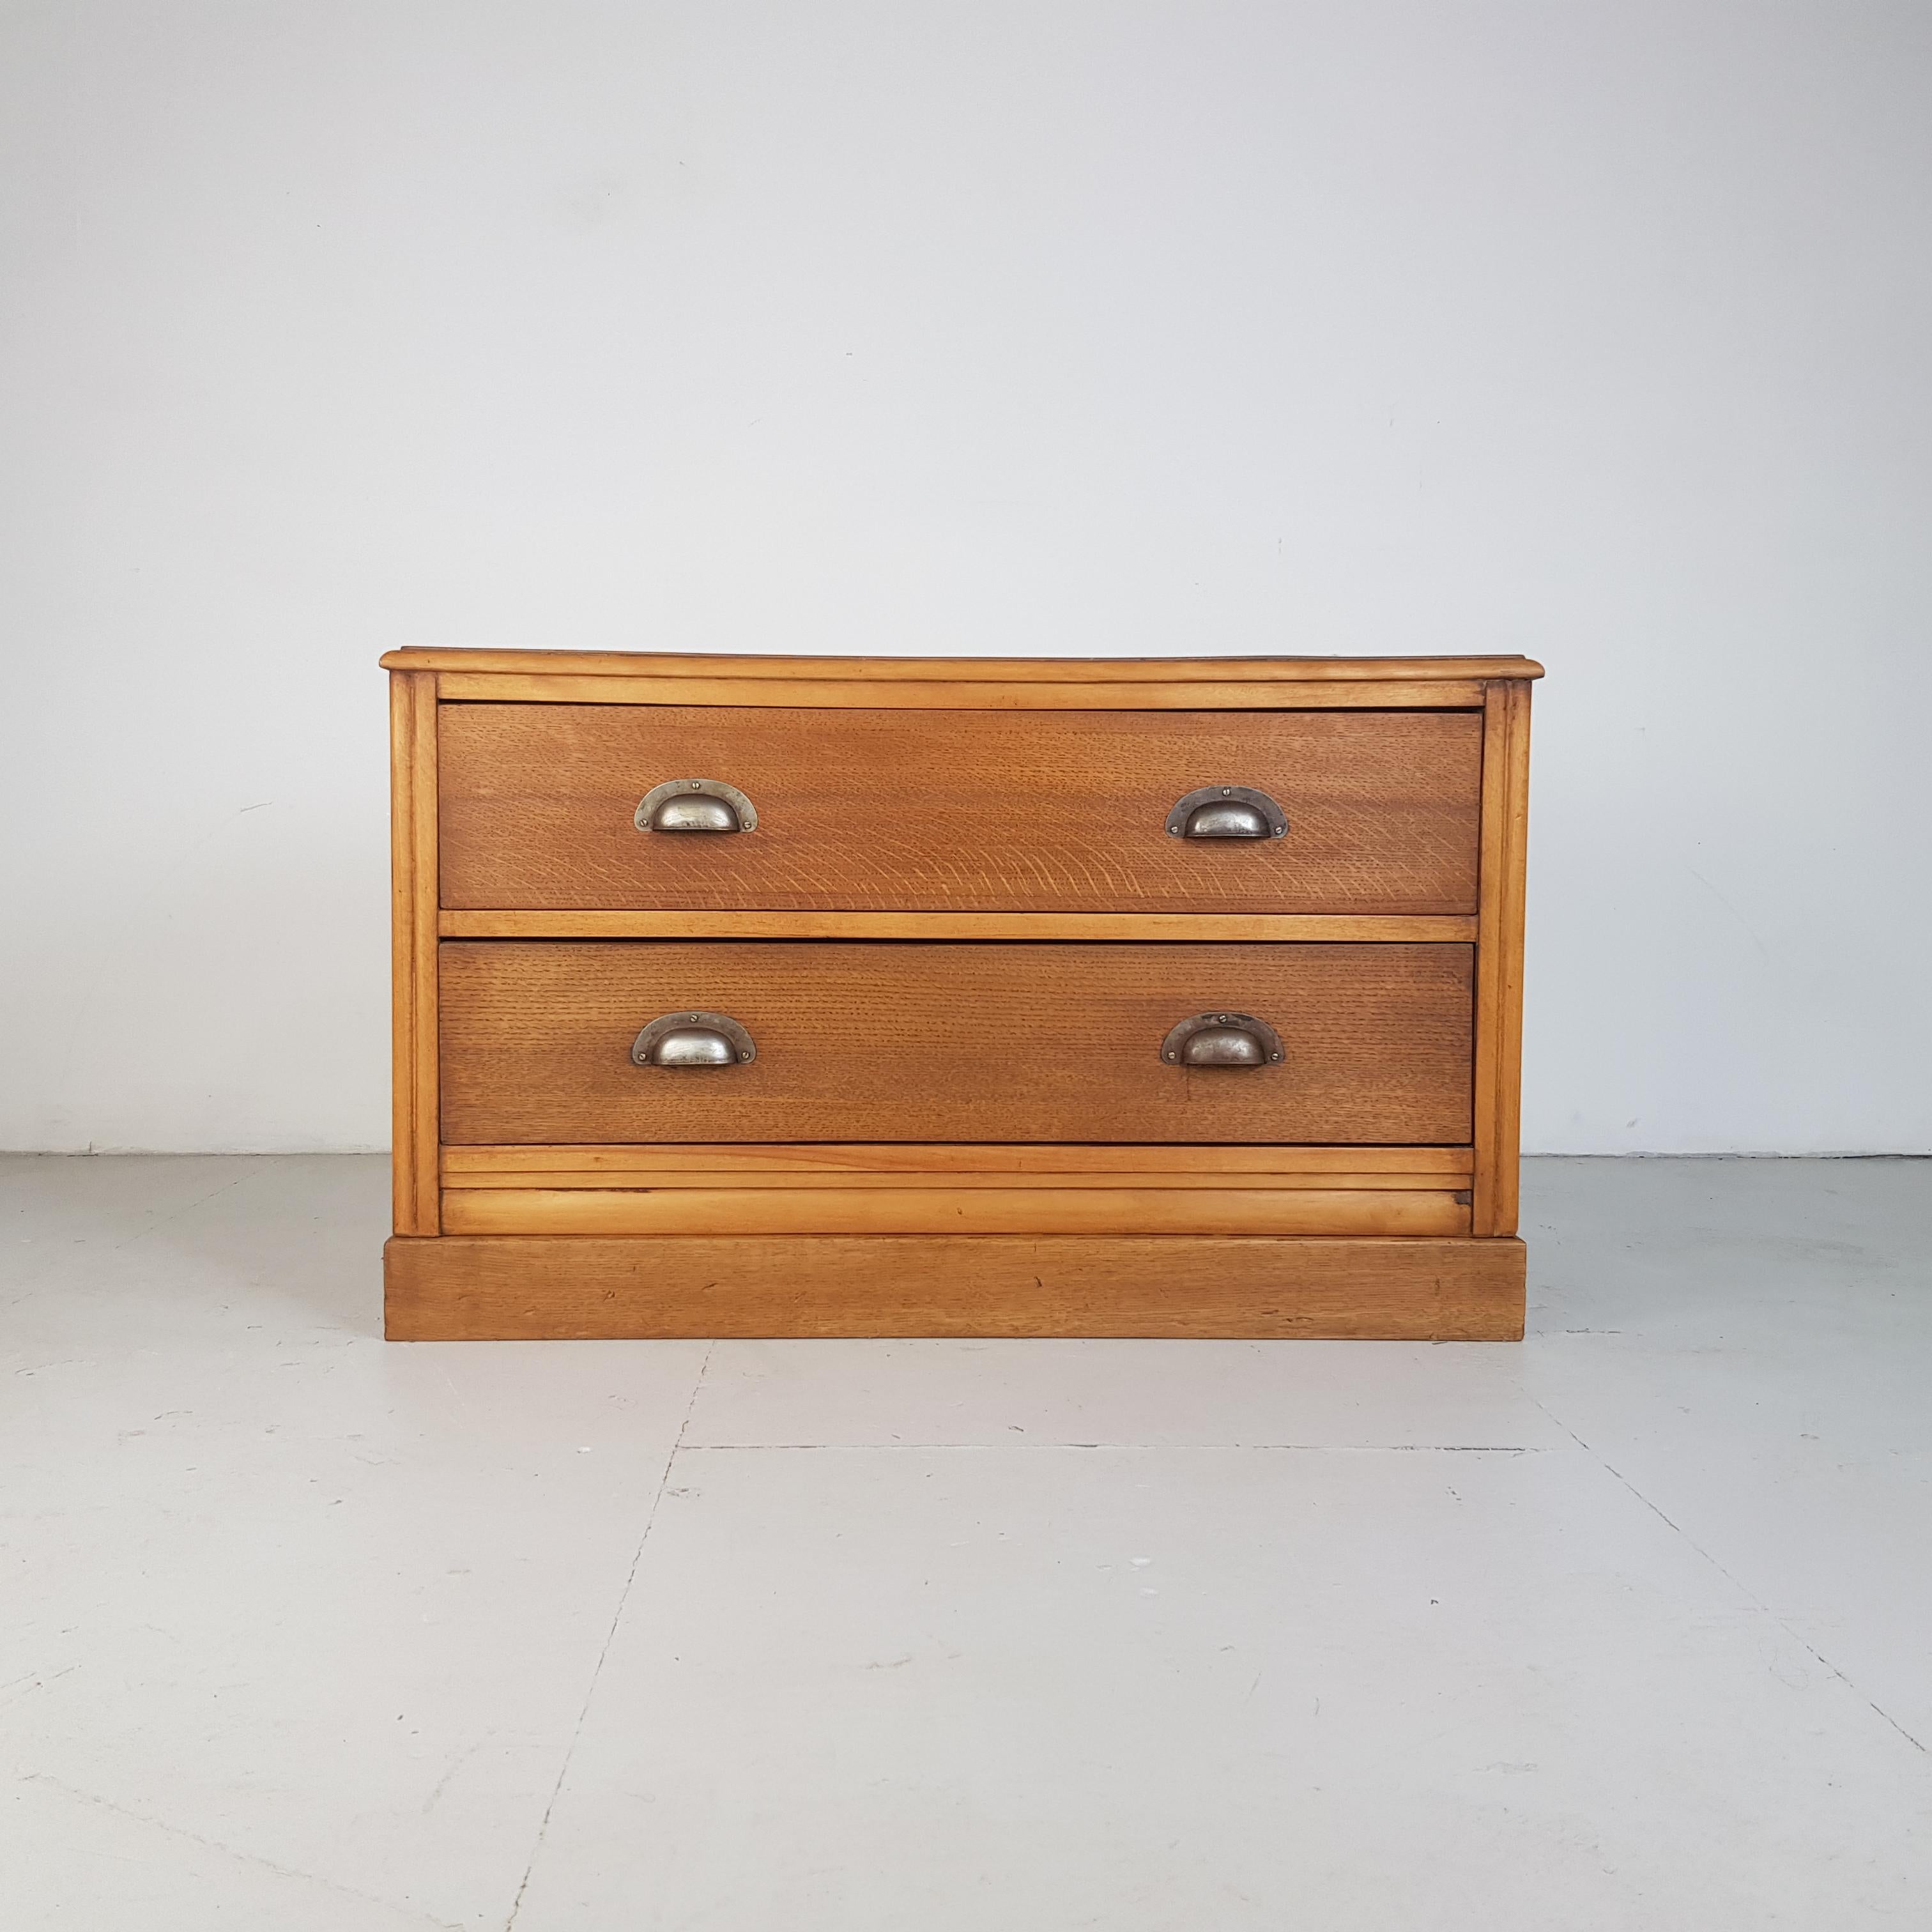 Lovely 1950s haberdashery style chest of drawers.

Offers lots of storage with 2 good deep drawers with dovetail joints.

In good vintage condition. Some scuffs and nicks here and there, but nothing that detracts. 

This item has been lightly